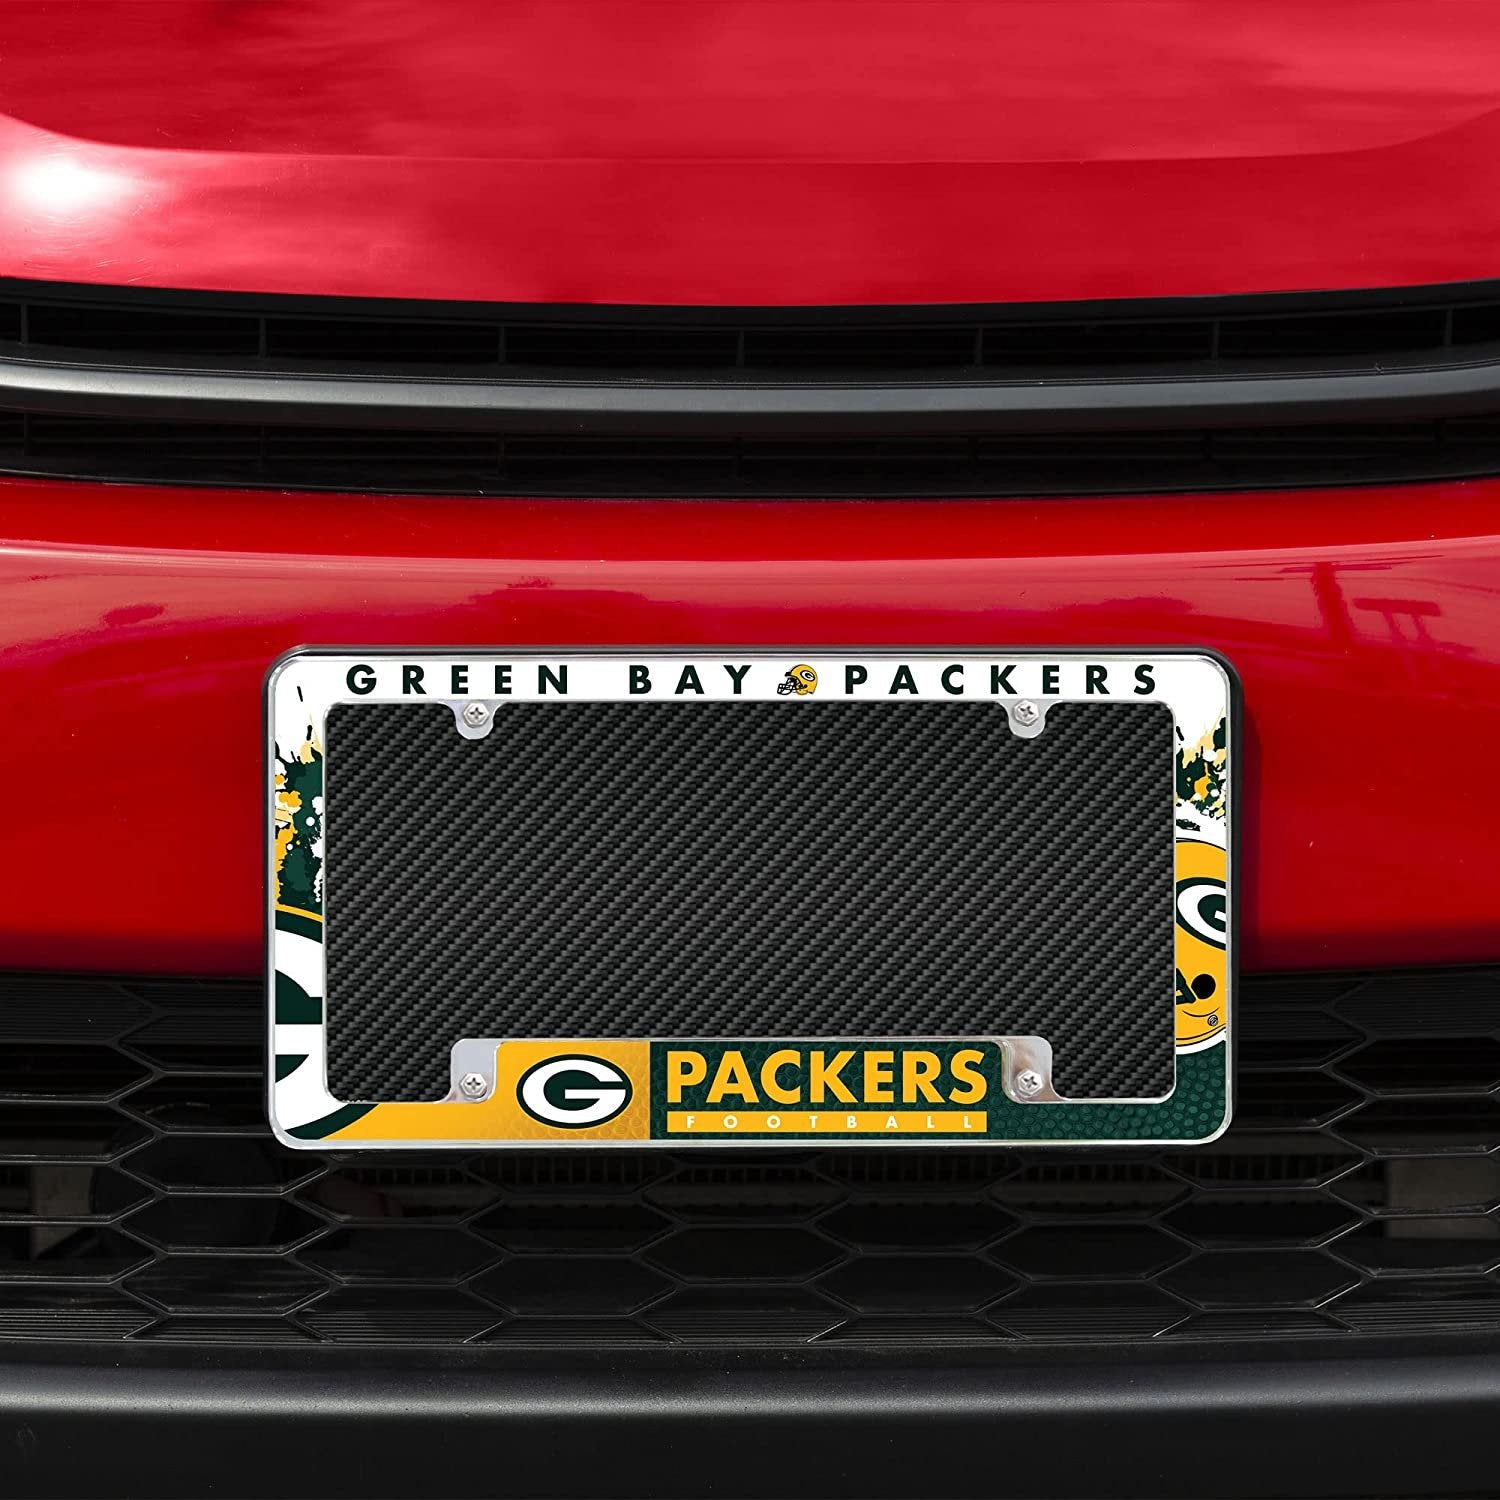 Green Bay Packers Metal License Plate Frame Chrome Tag Cover All Over Design 6x12 Inch